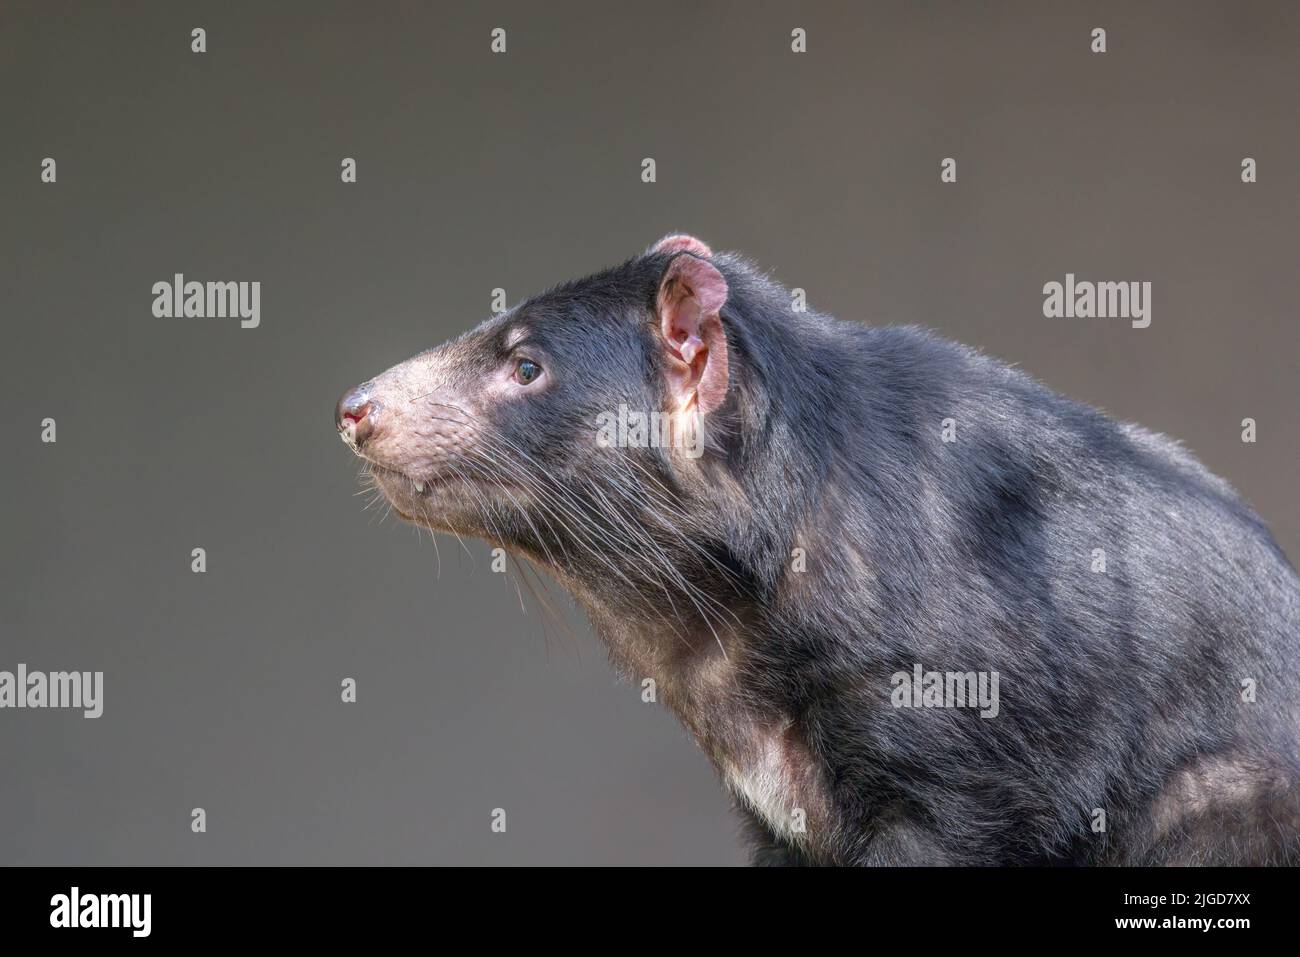 Close-up profile portrait of a Tasmanian Devil (Sarcophilus harrisii). They are the world’s largest carnivorous marsupials. Stock Photo